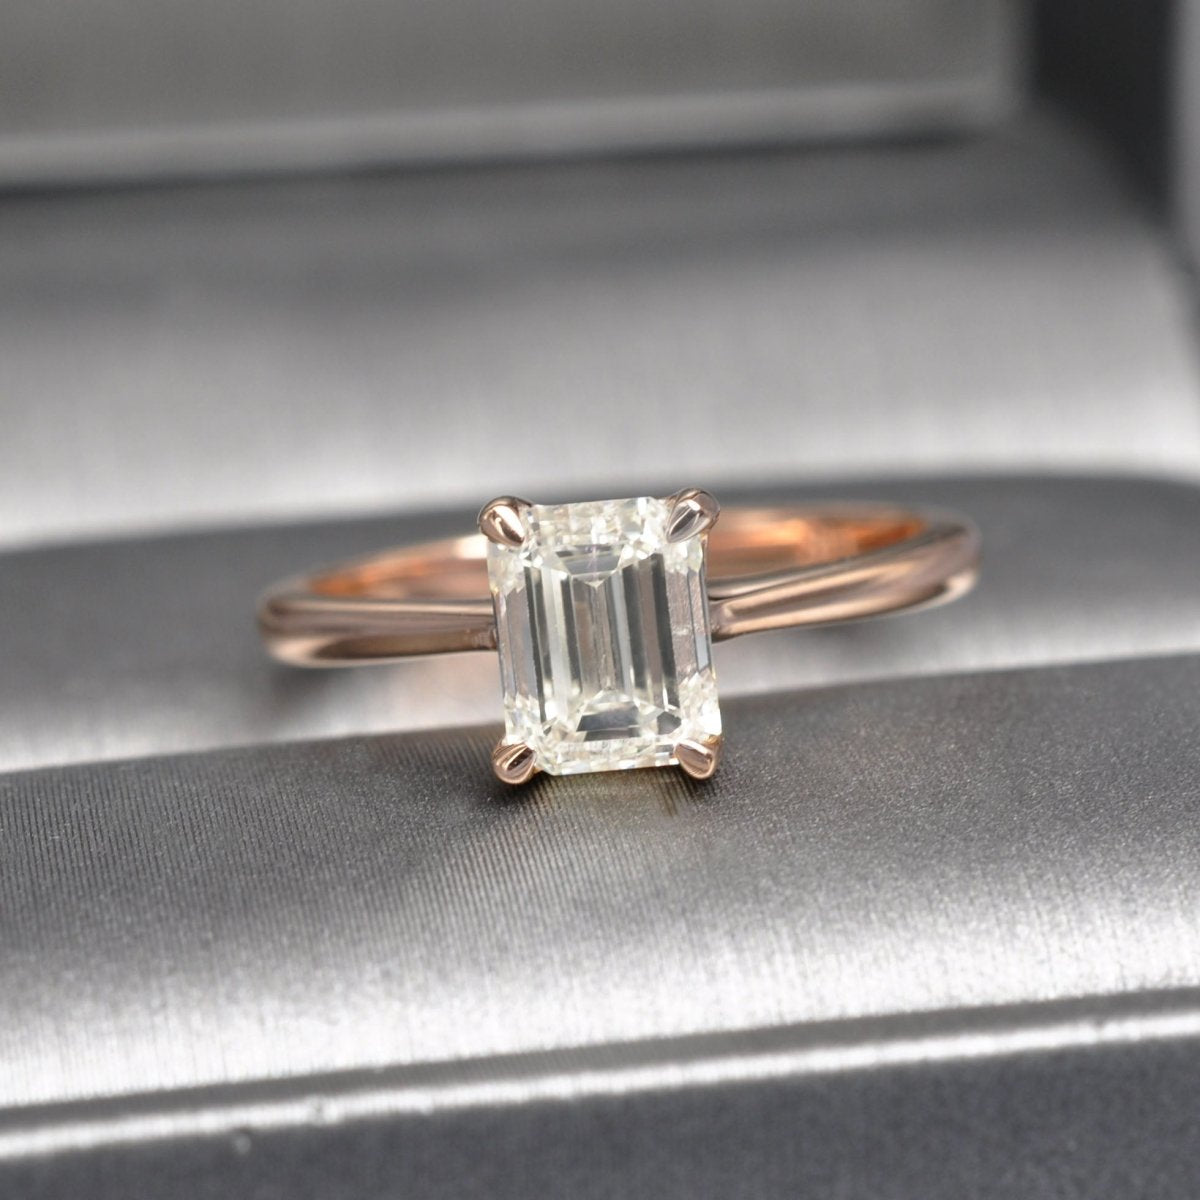 Breathtaking 1.52CT Emerald Cut Diamond Solitaire Ring in 14KT Rose Gold - Primestyle.com